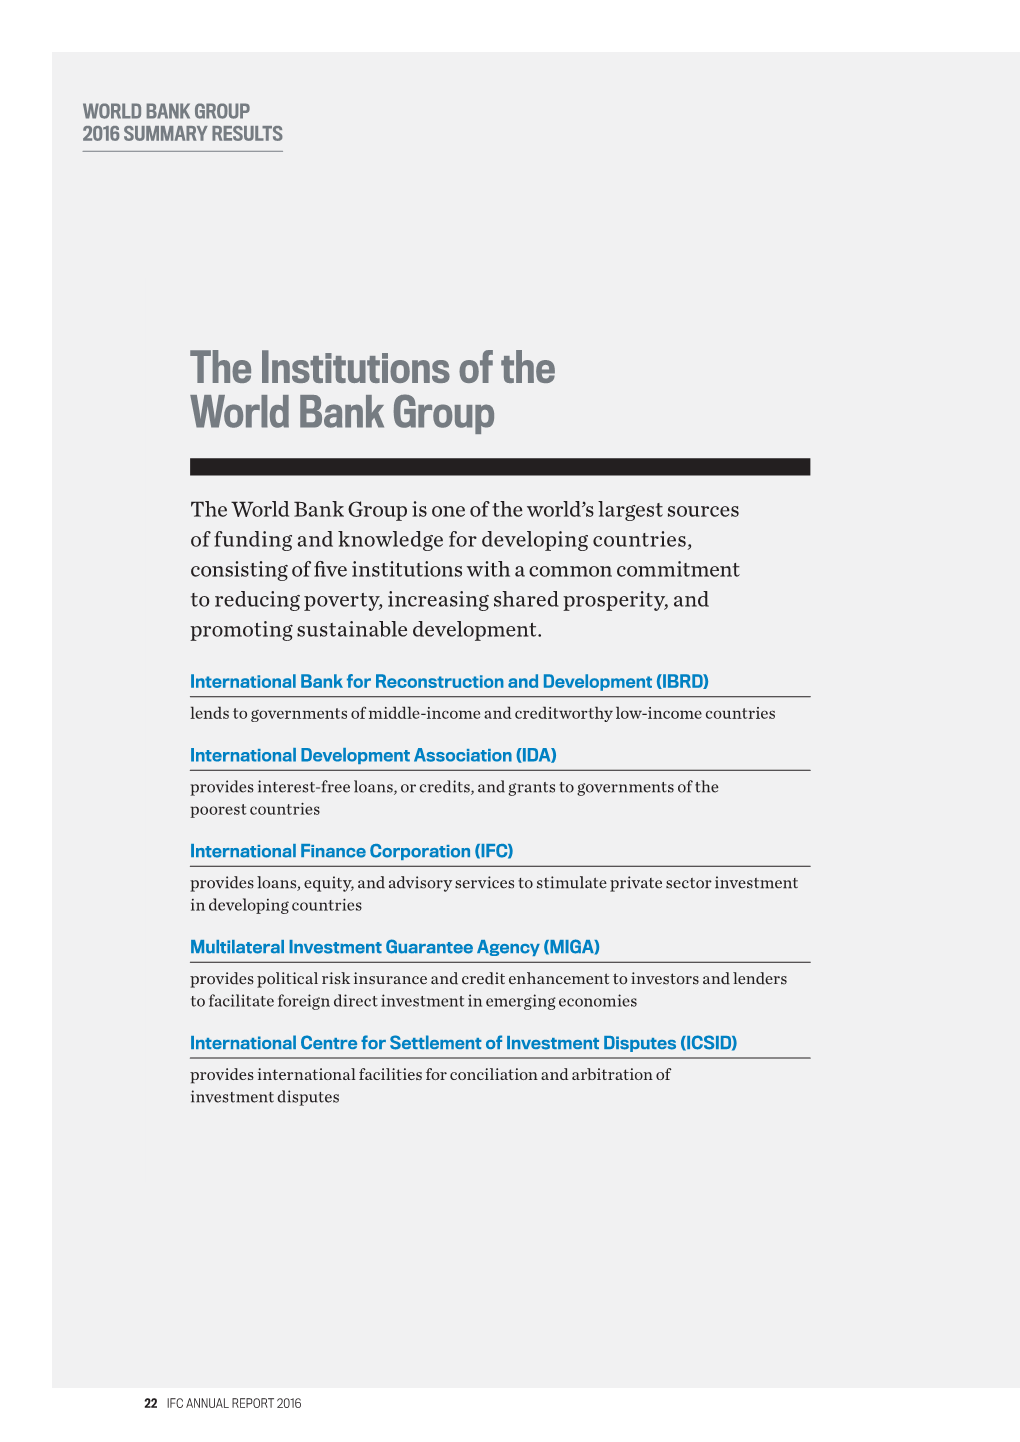 The Institutions of the World Bank Group